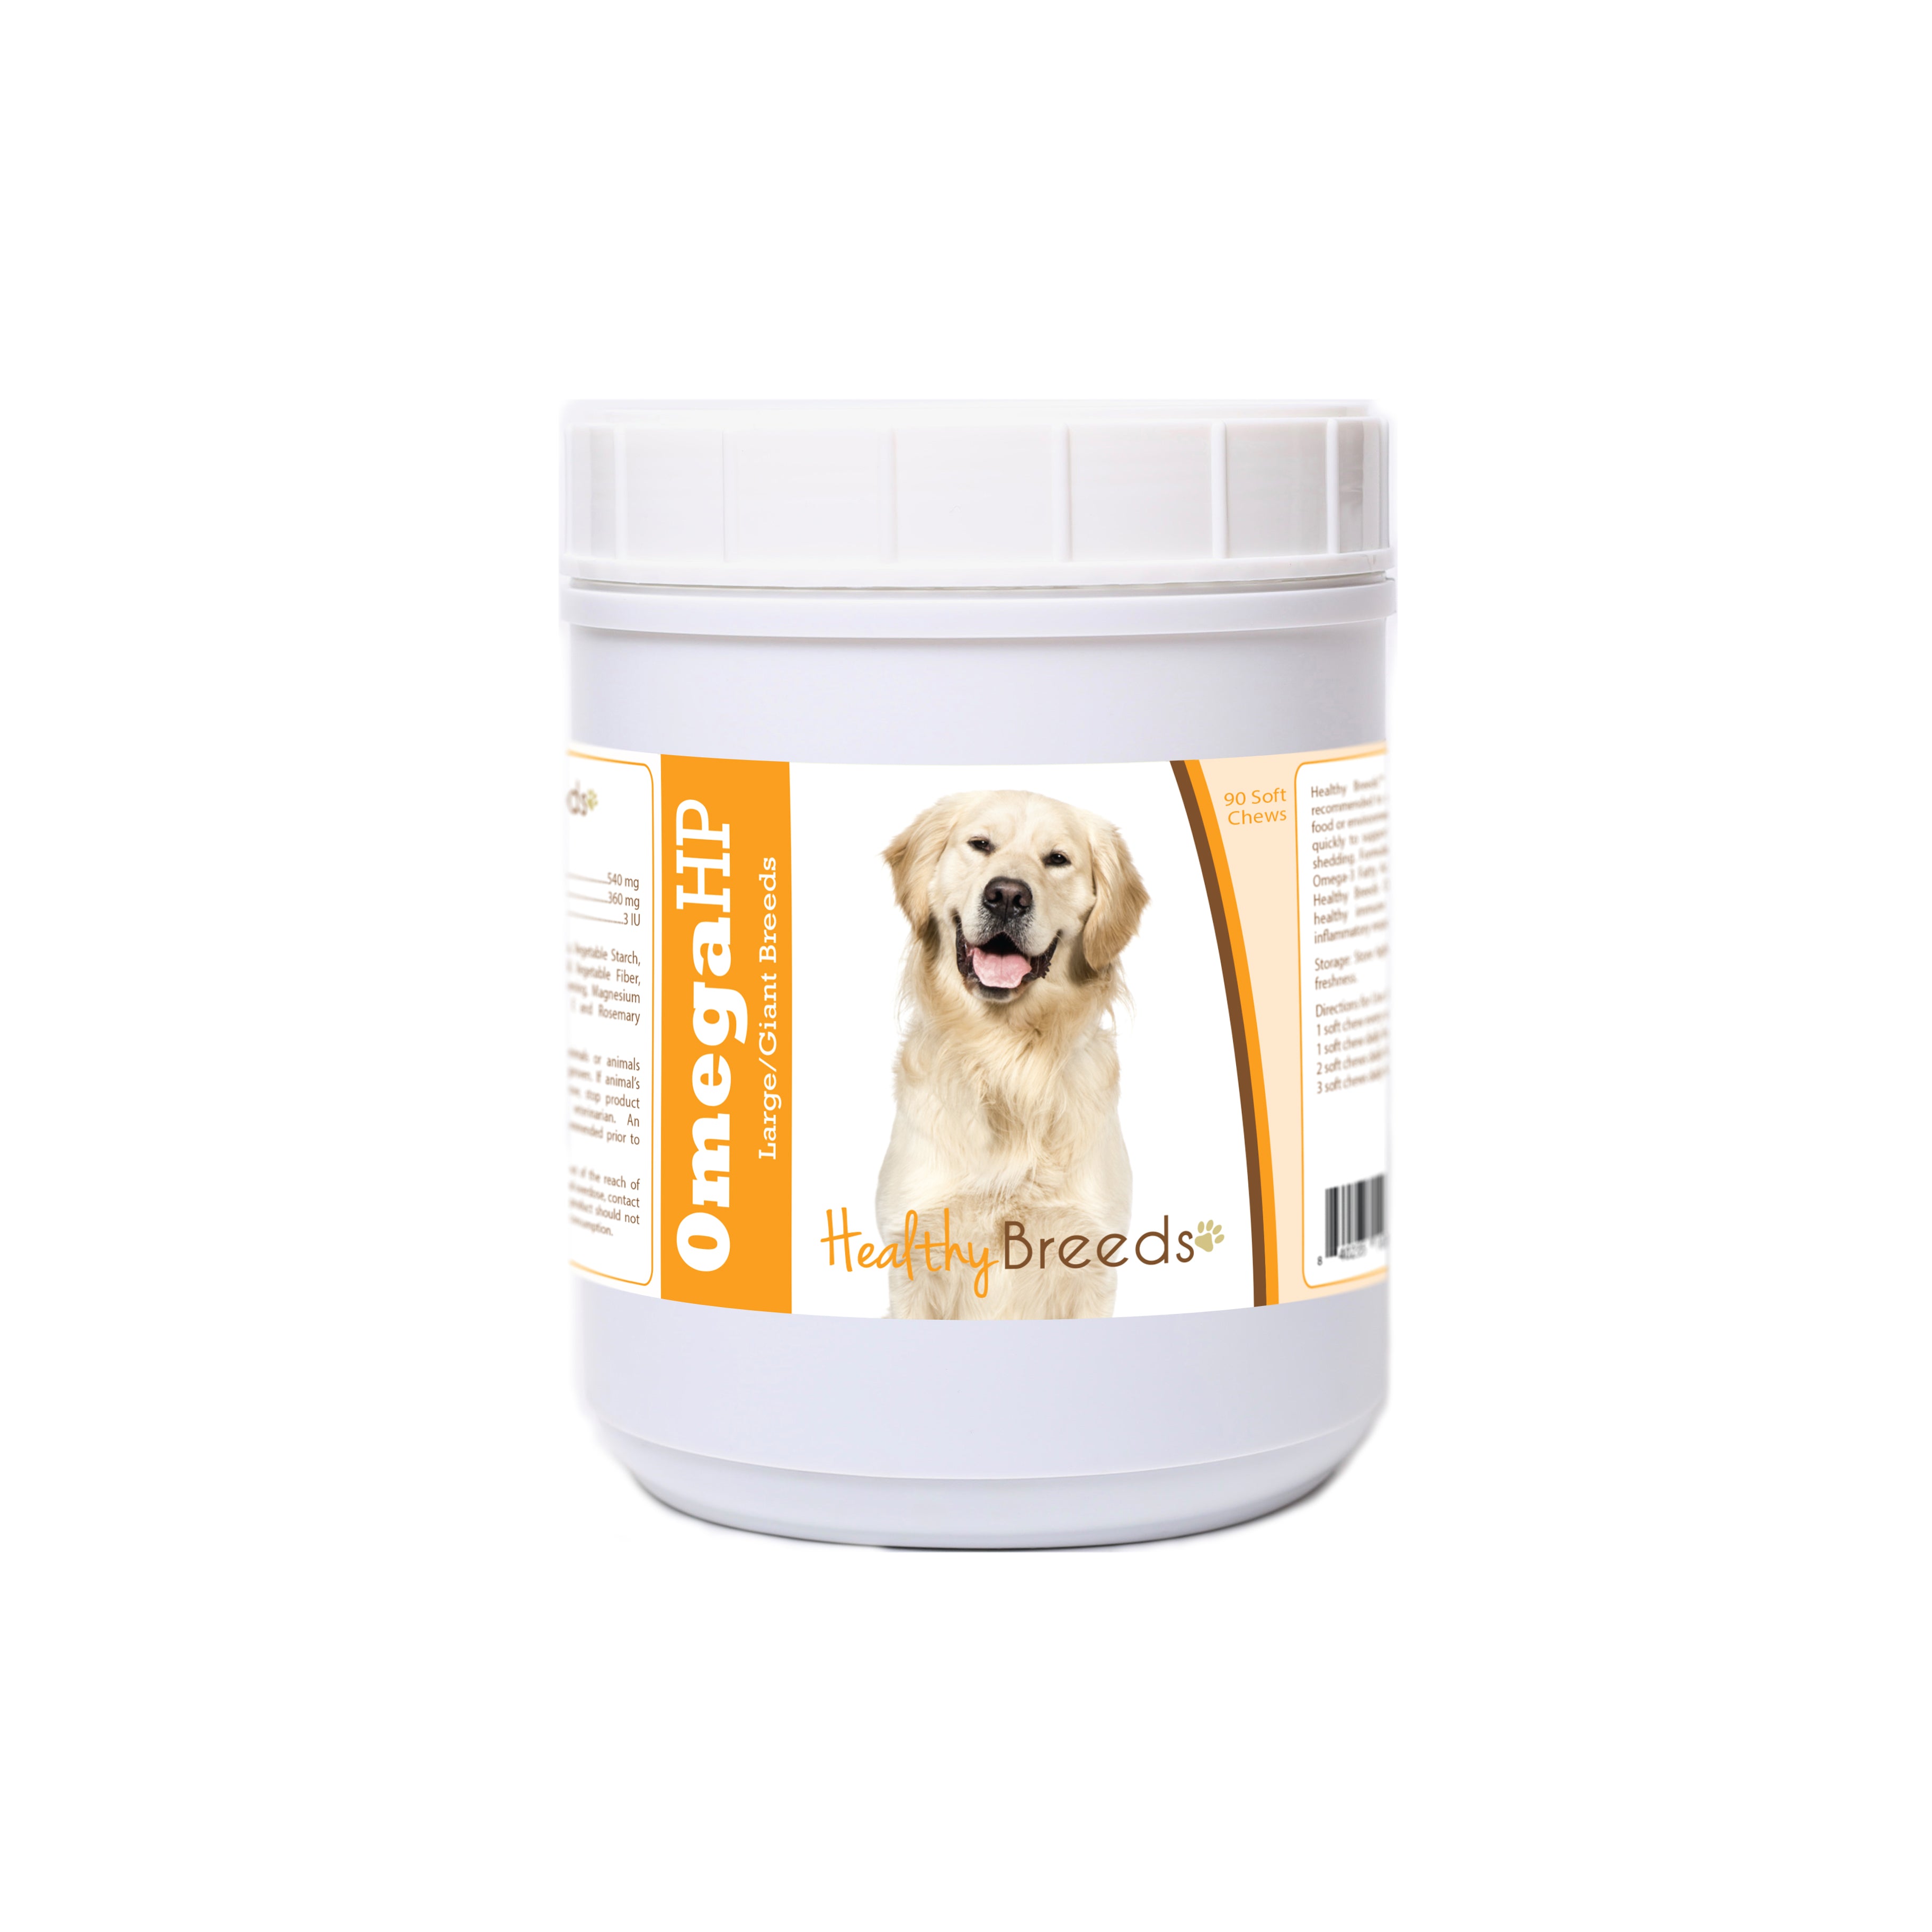 Golden Retriever Omega HP Fatty Acid Skin and Coat Support Soft Chews 90 Count